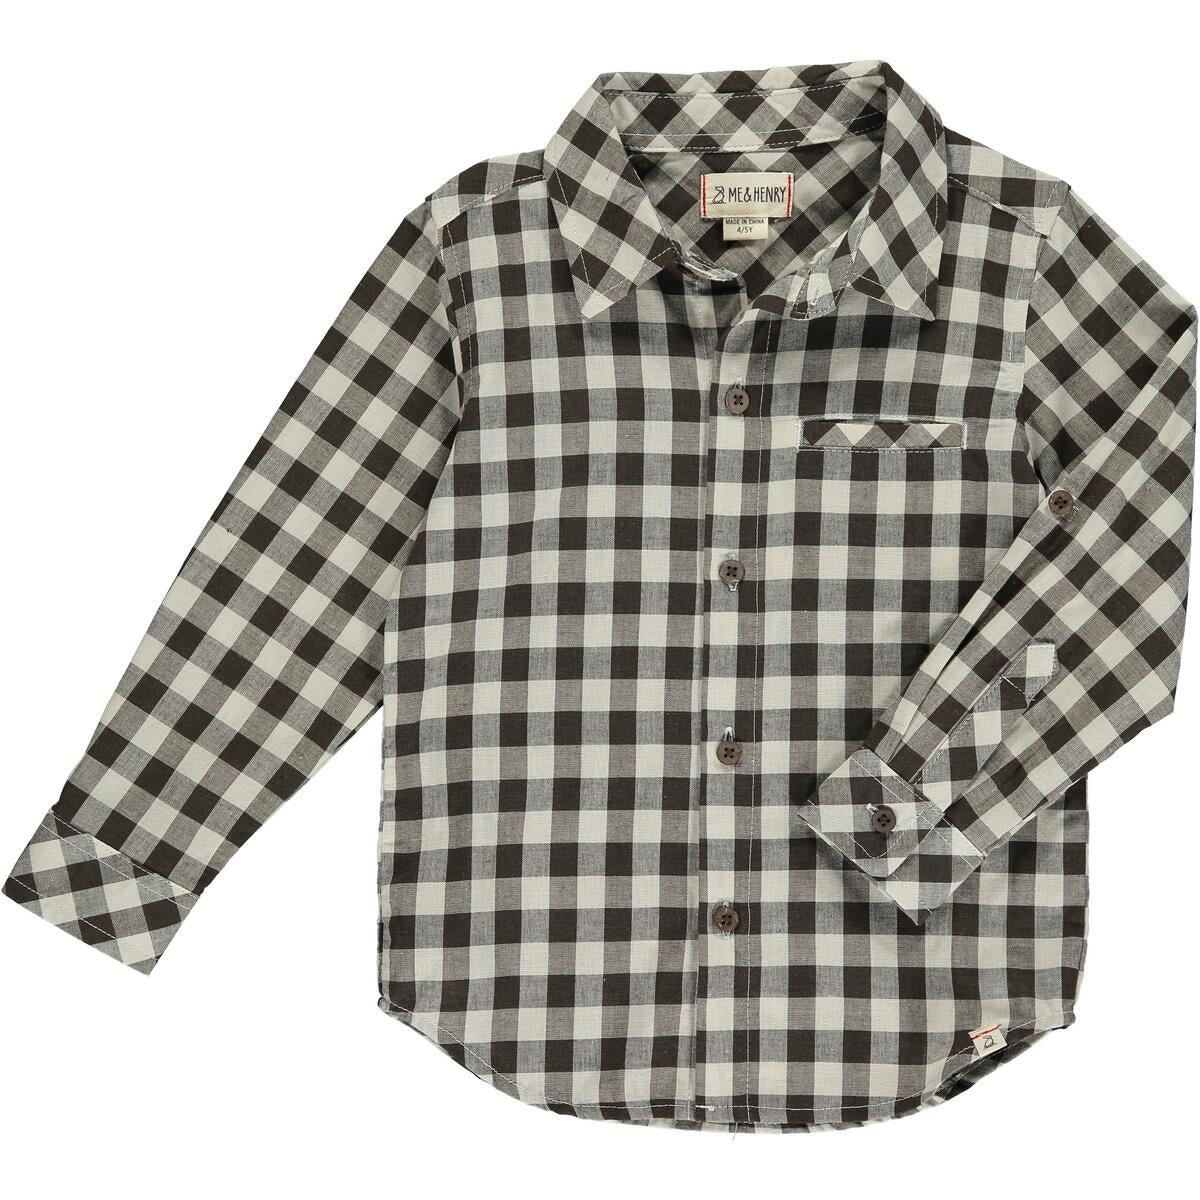 Atwood Woven shirt- Brown/ Cream Plaid